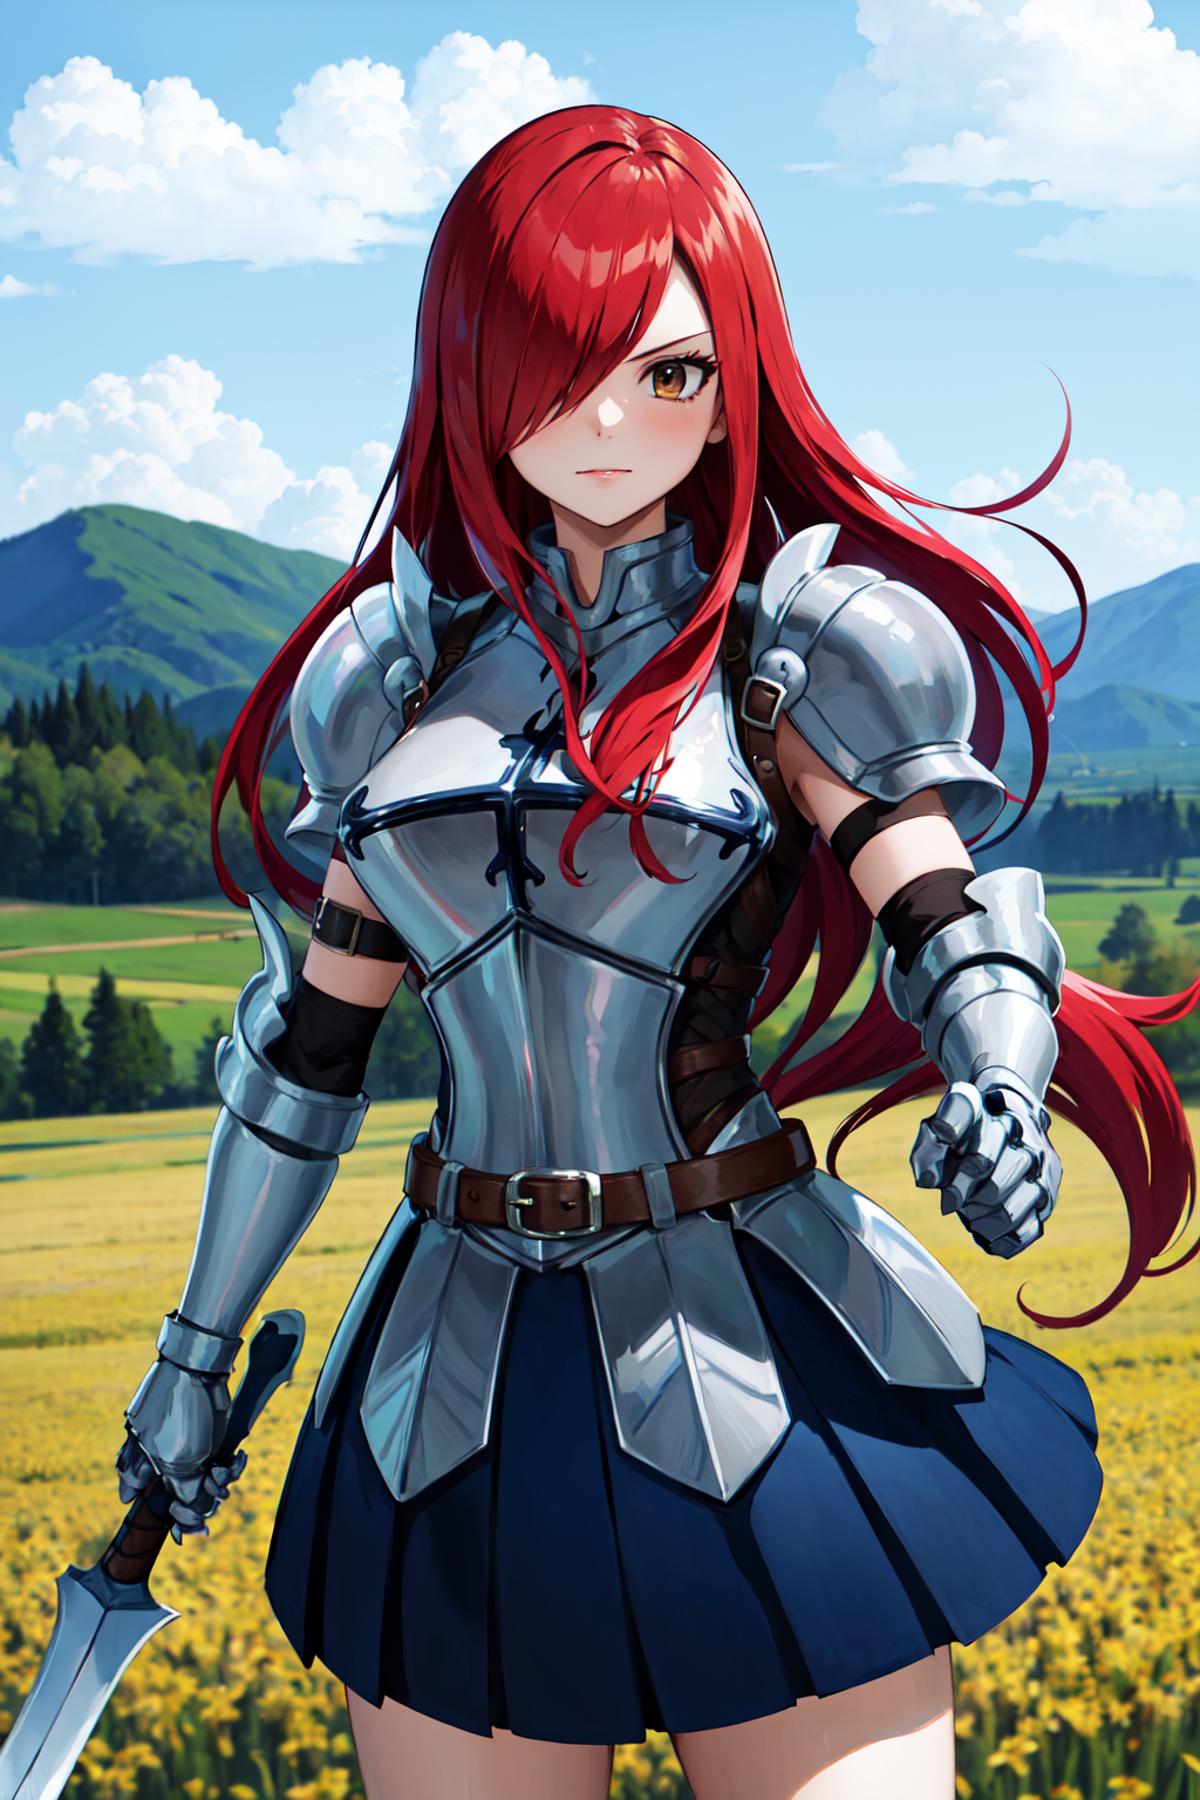 Anime art of a woman in armor standing in a field.